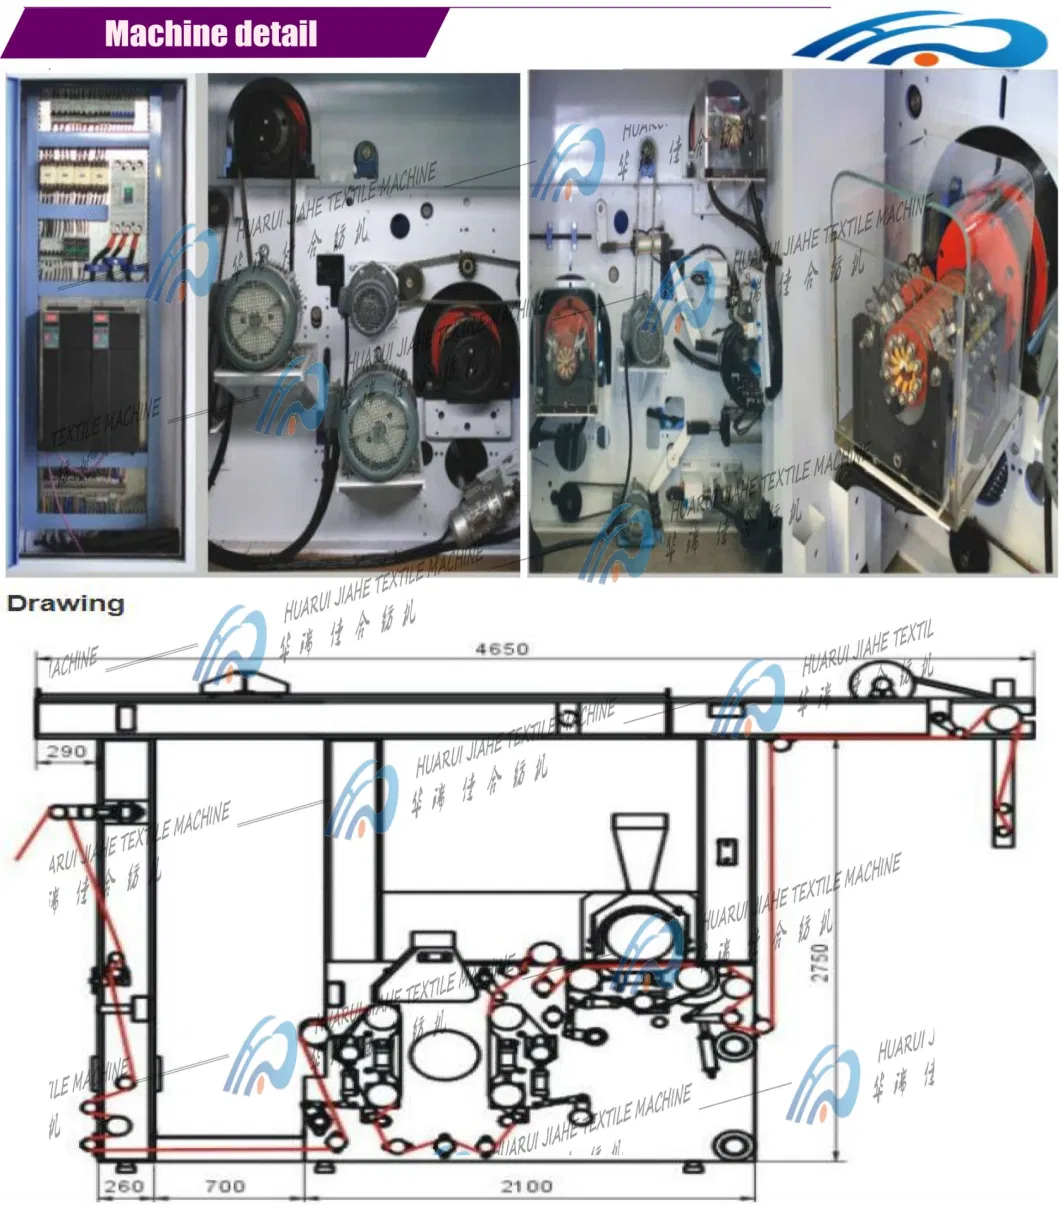 Burn-out Machine for Mink Blanket Production Line with Printing Machine, Washing Machine and Stenter Setting Machine